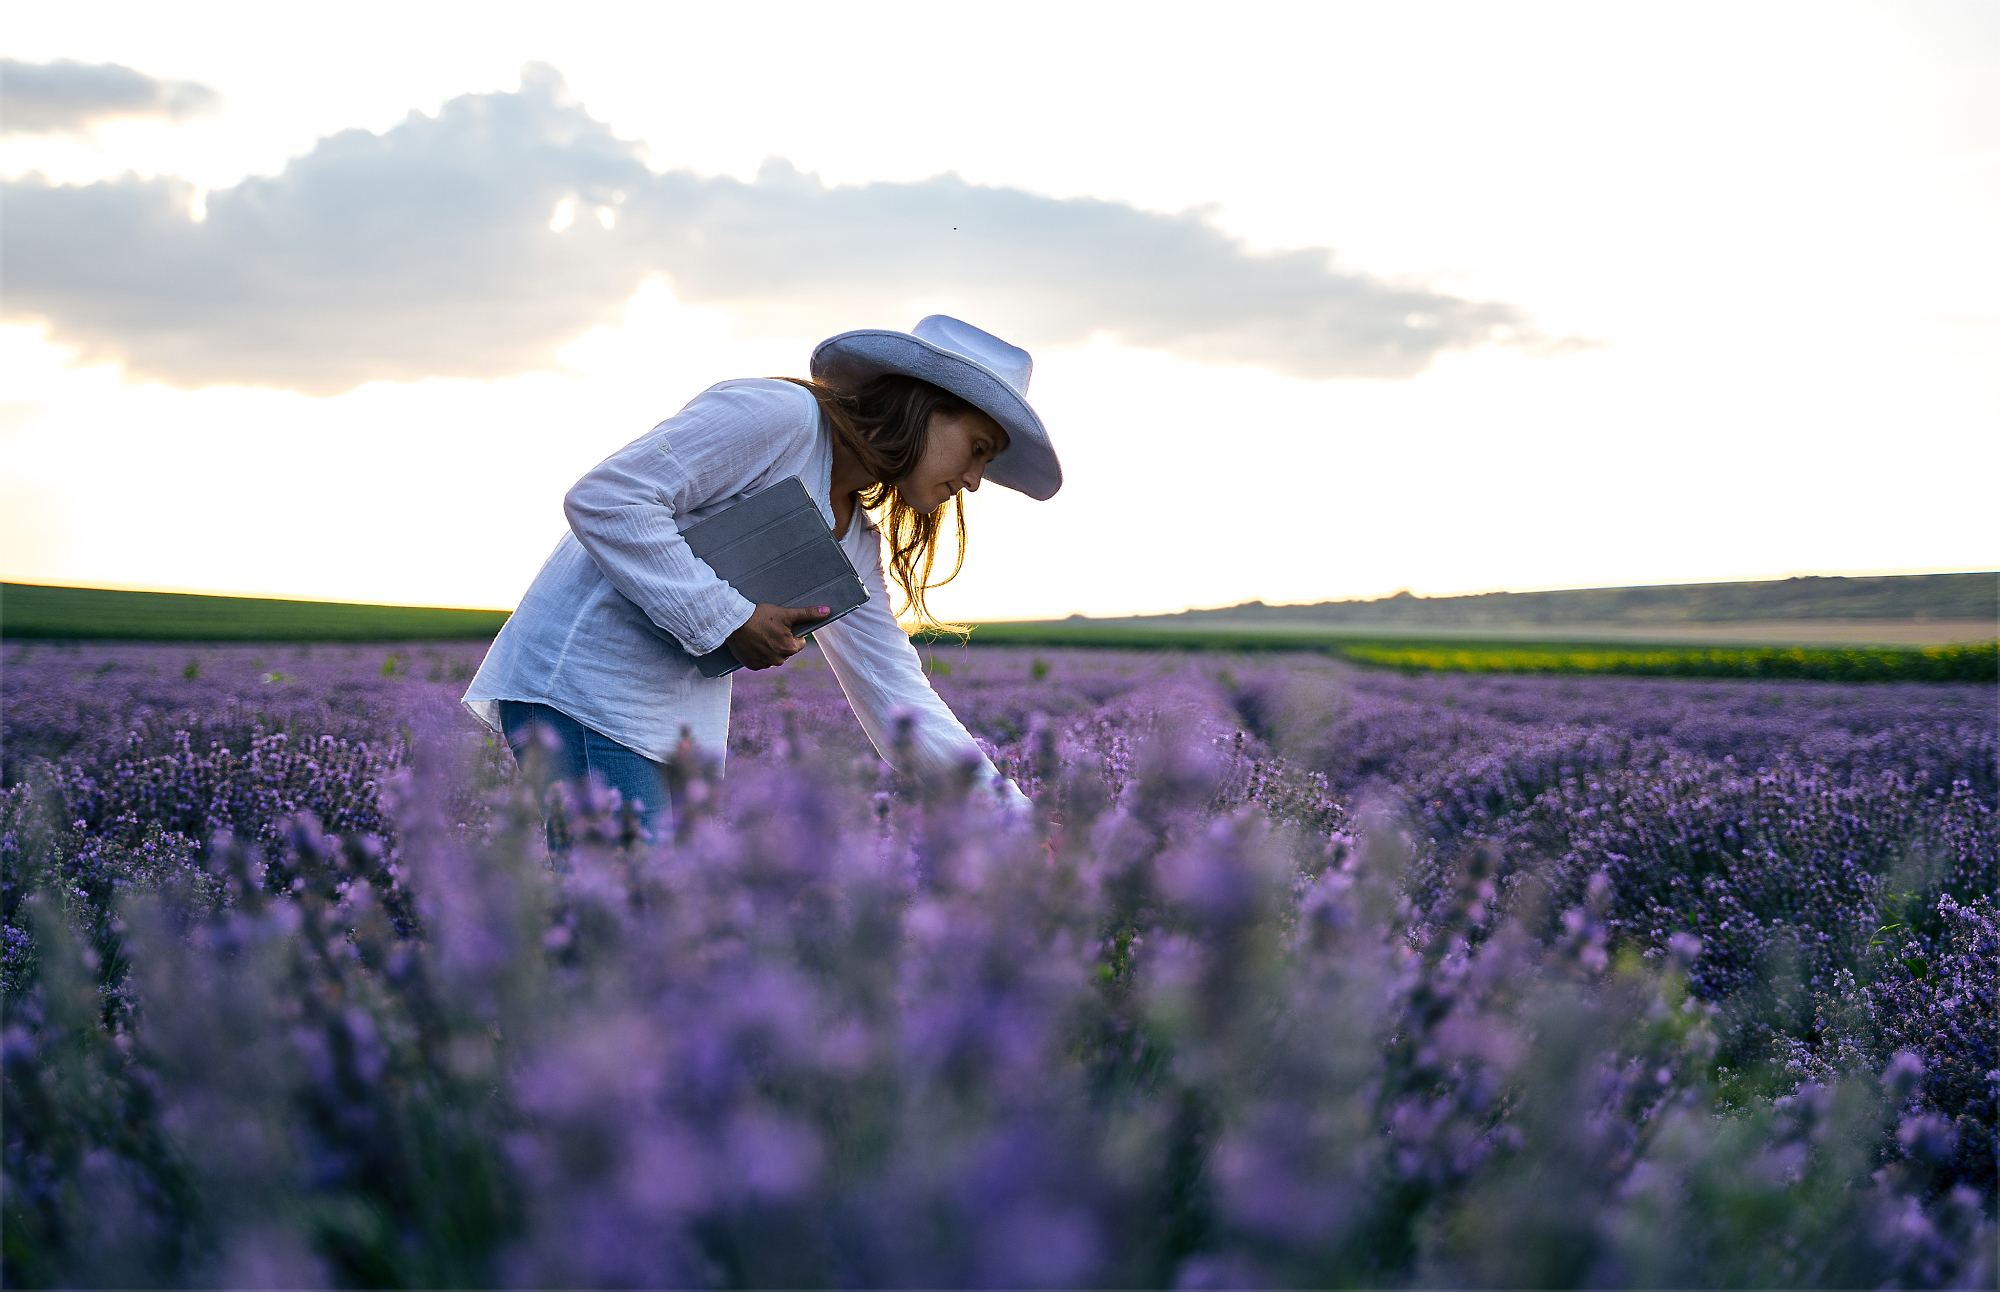 A person holds a notebook while standing in a lavender field at dusk, touching or picking the plants.